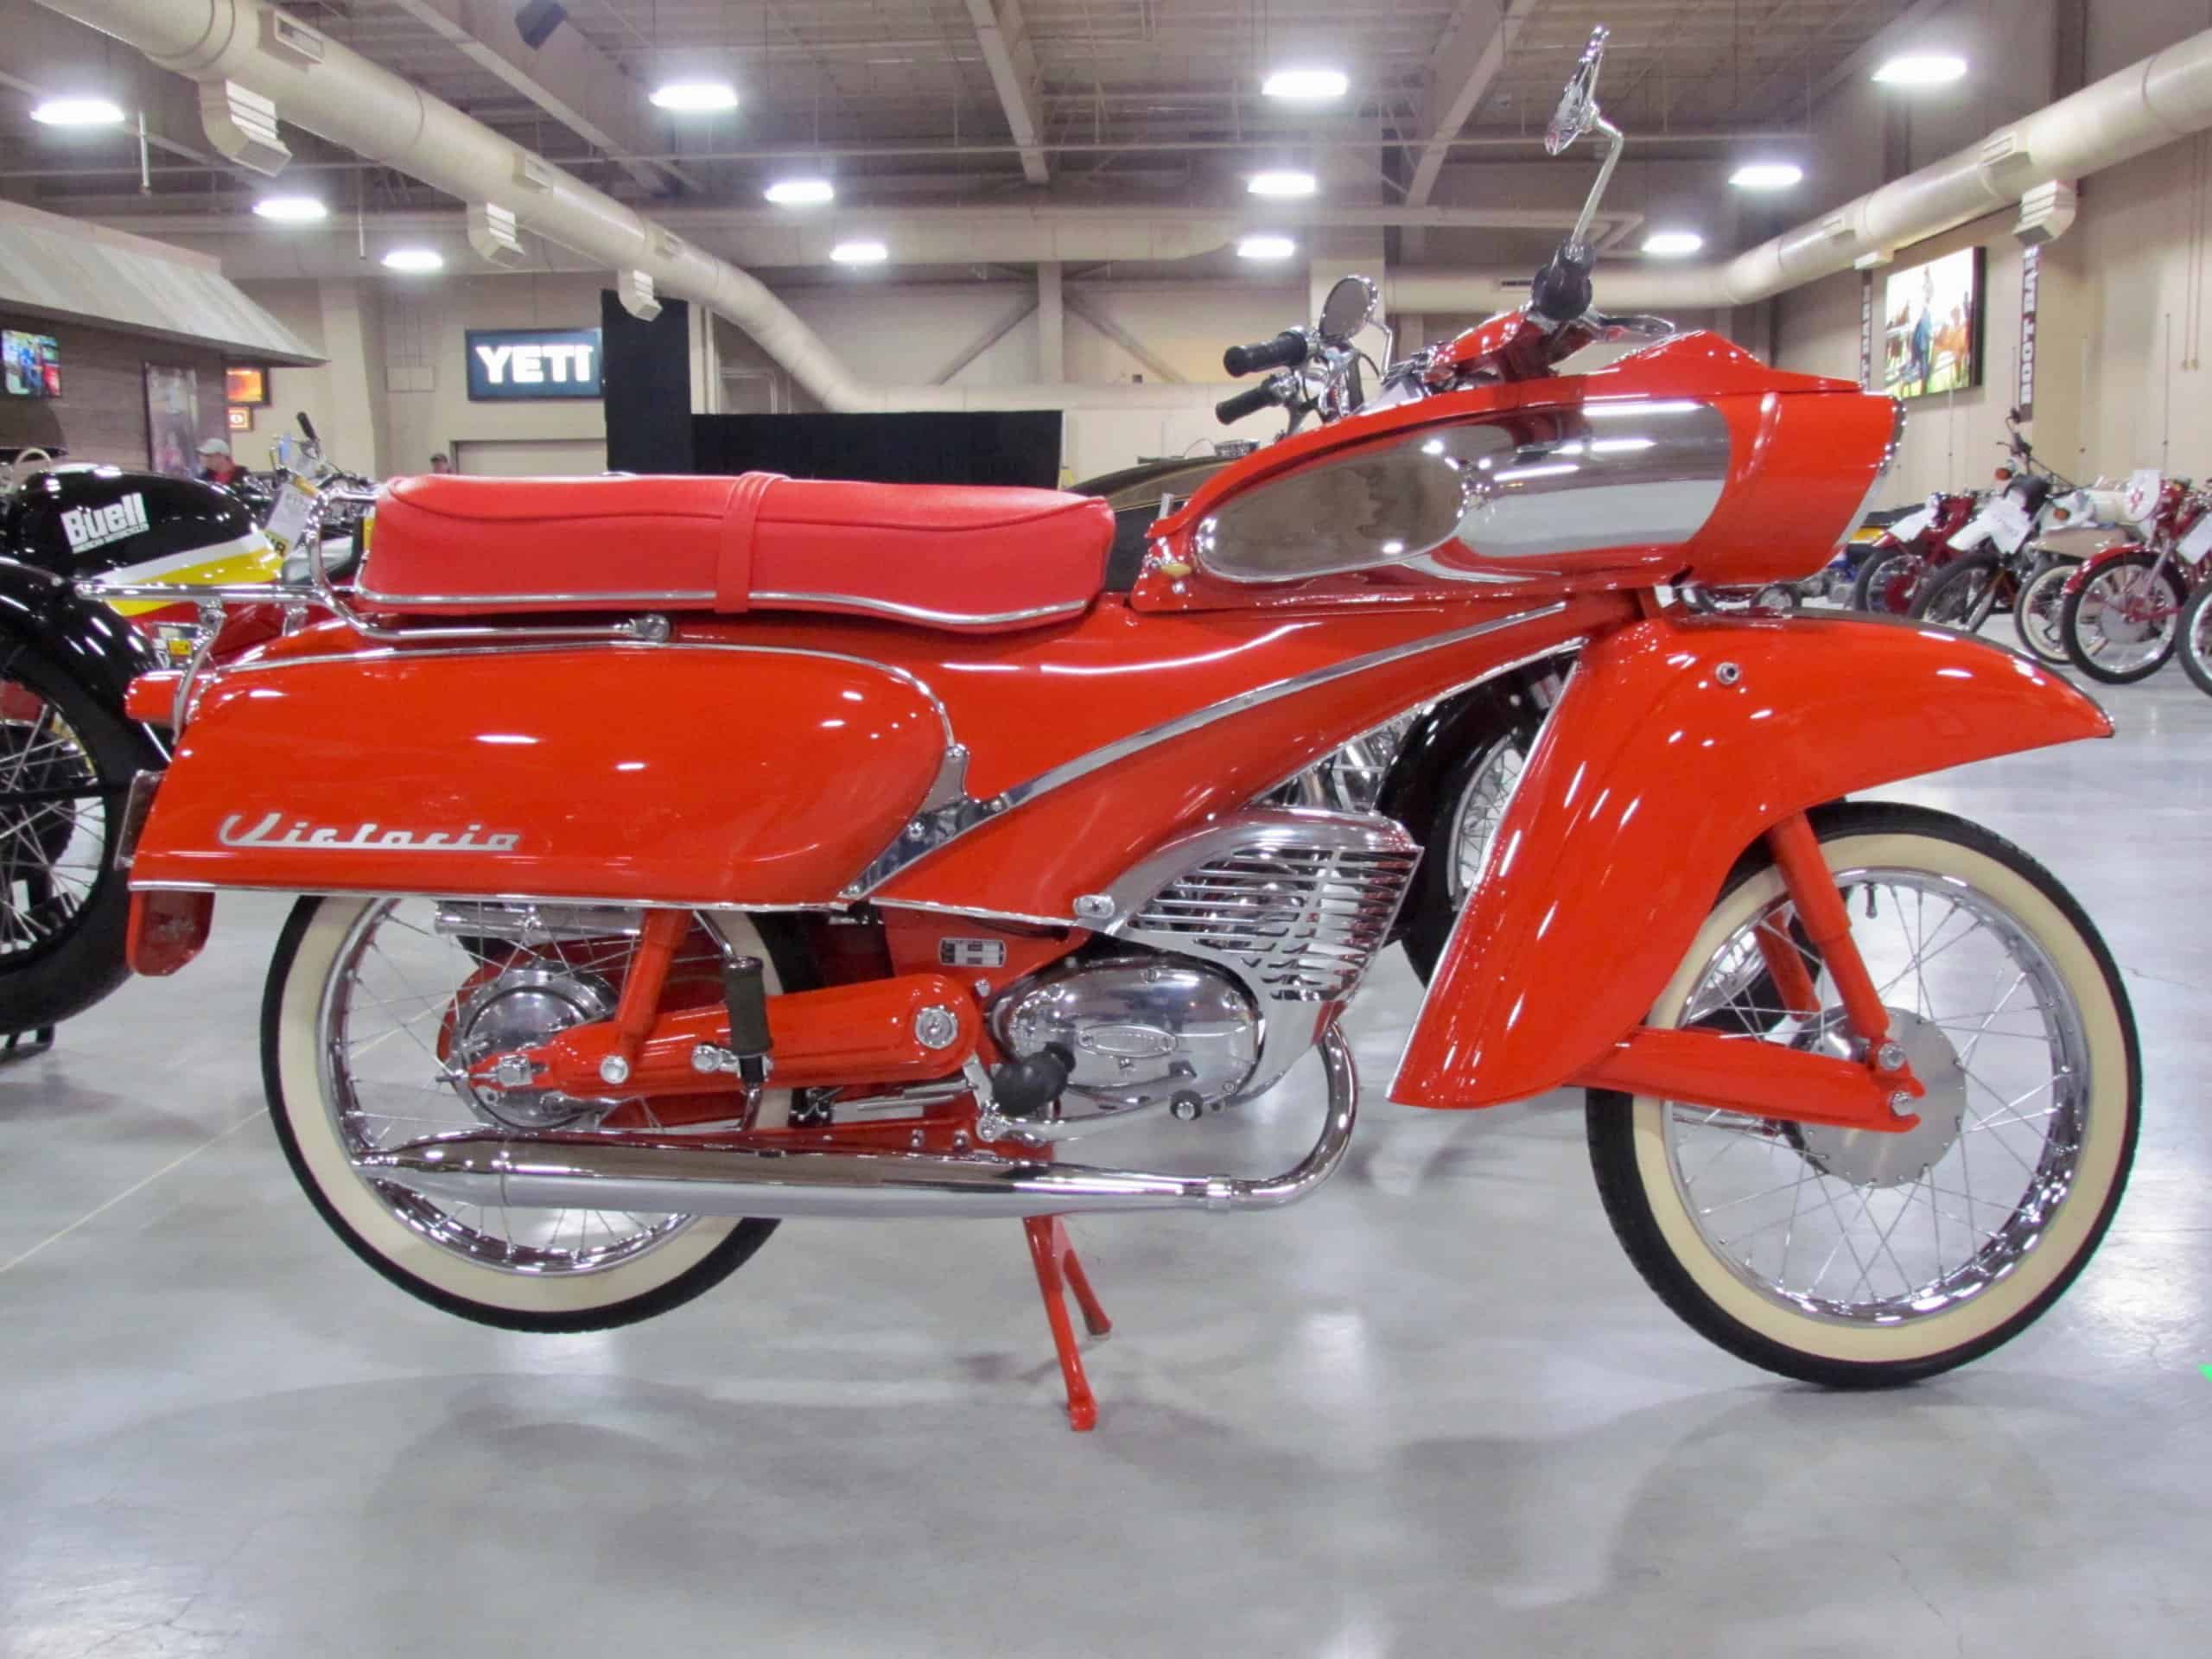 Motorcycle auction, Larry’s likes at Mecum’s Las Vegas motorcycle auction, ClassicCars.com Journal